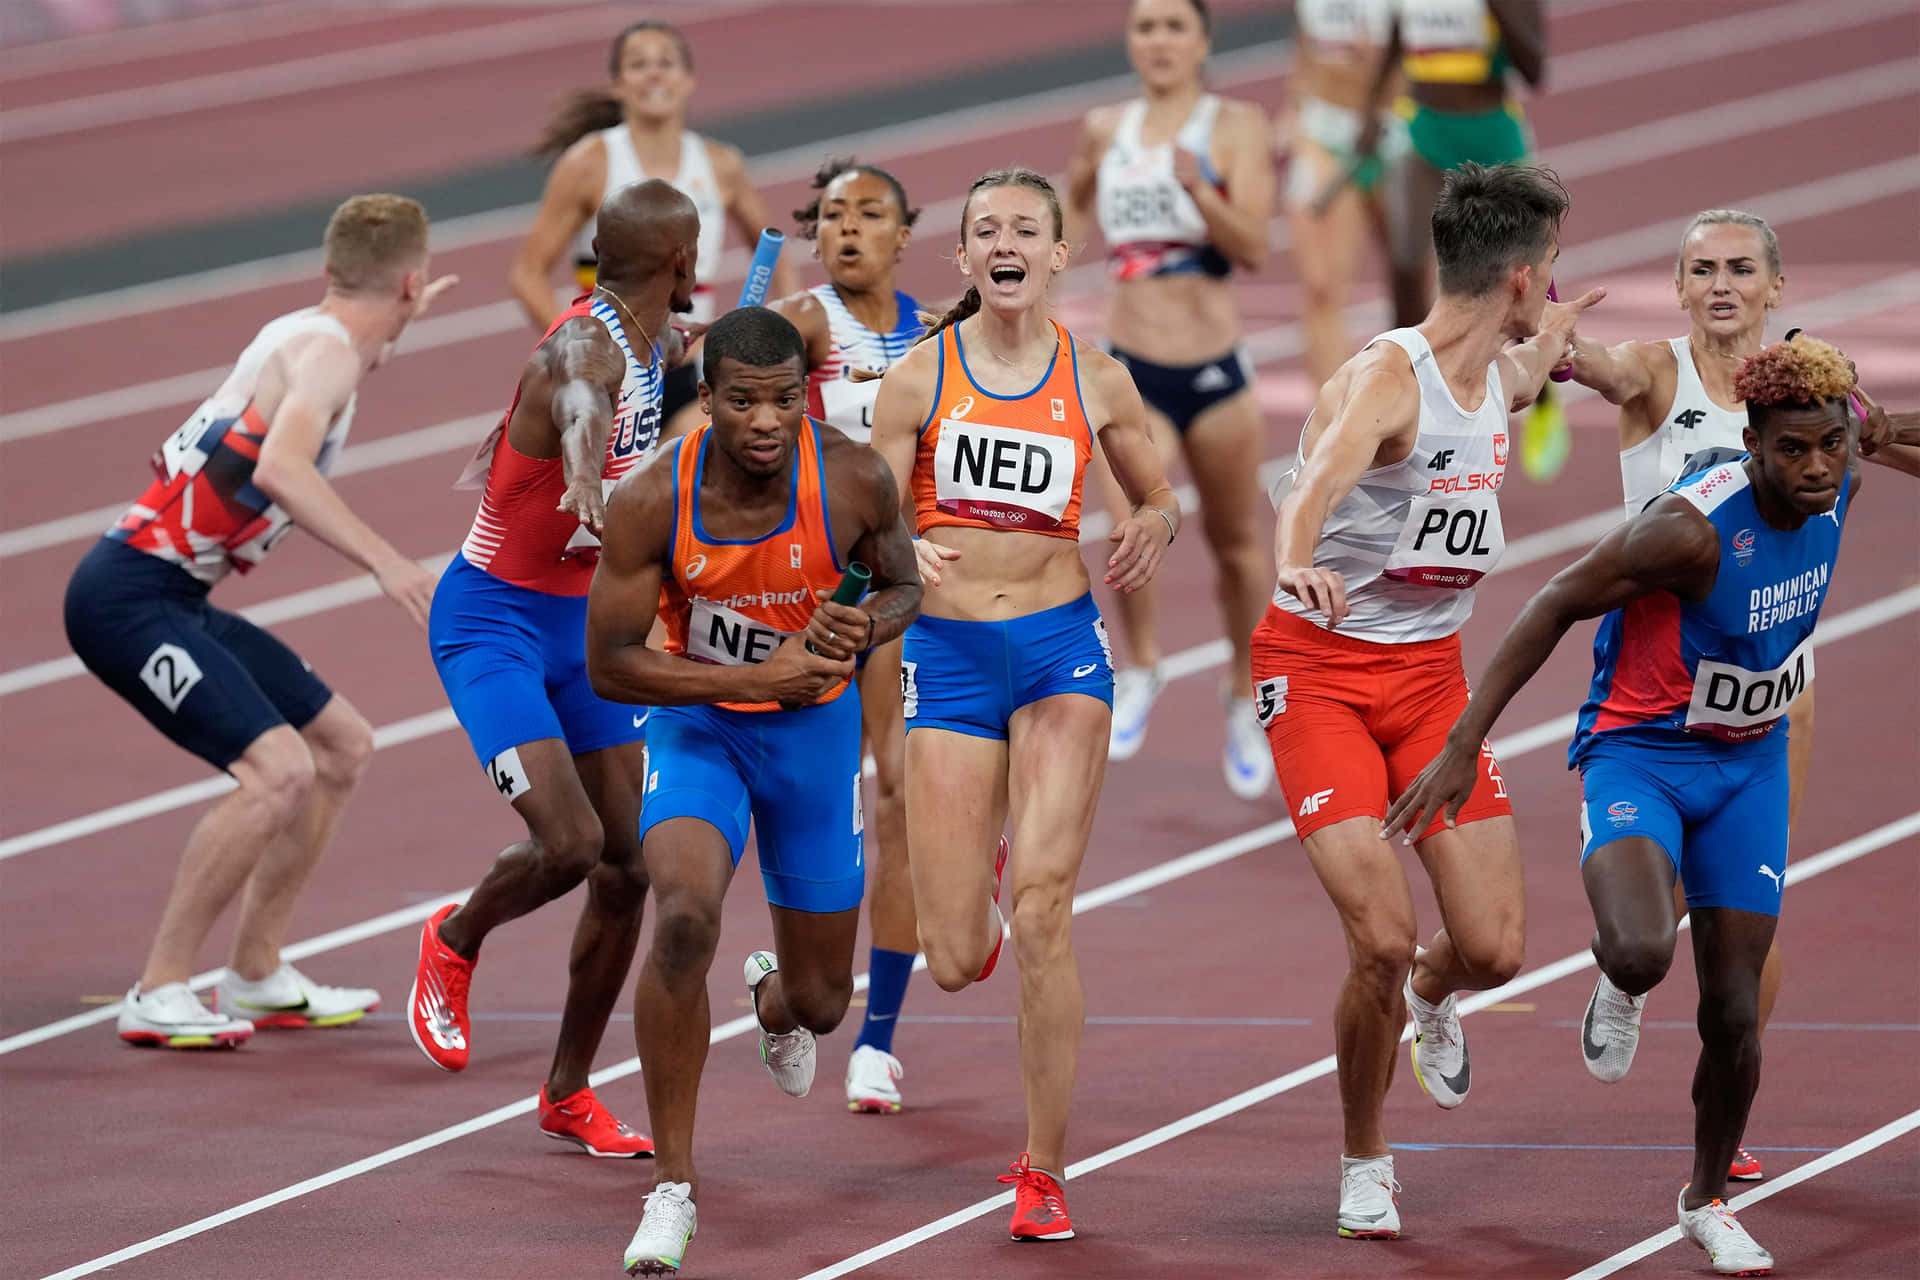 A Group Of Athletes Running On A Track